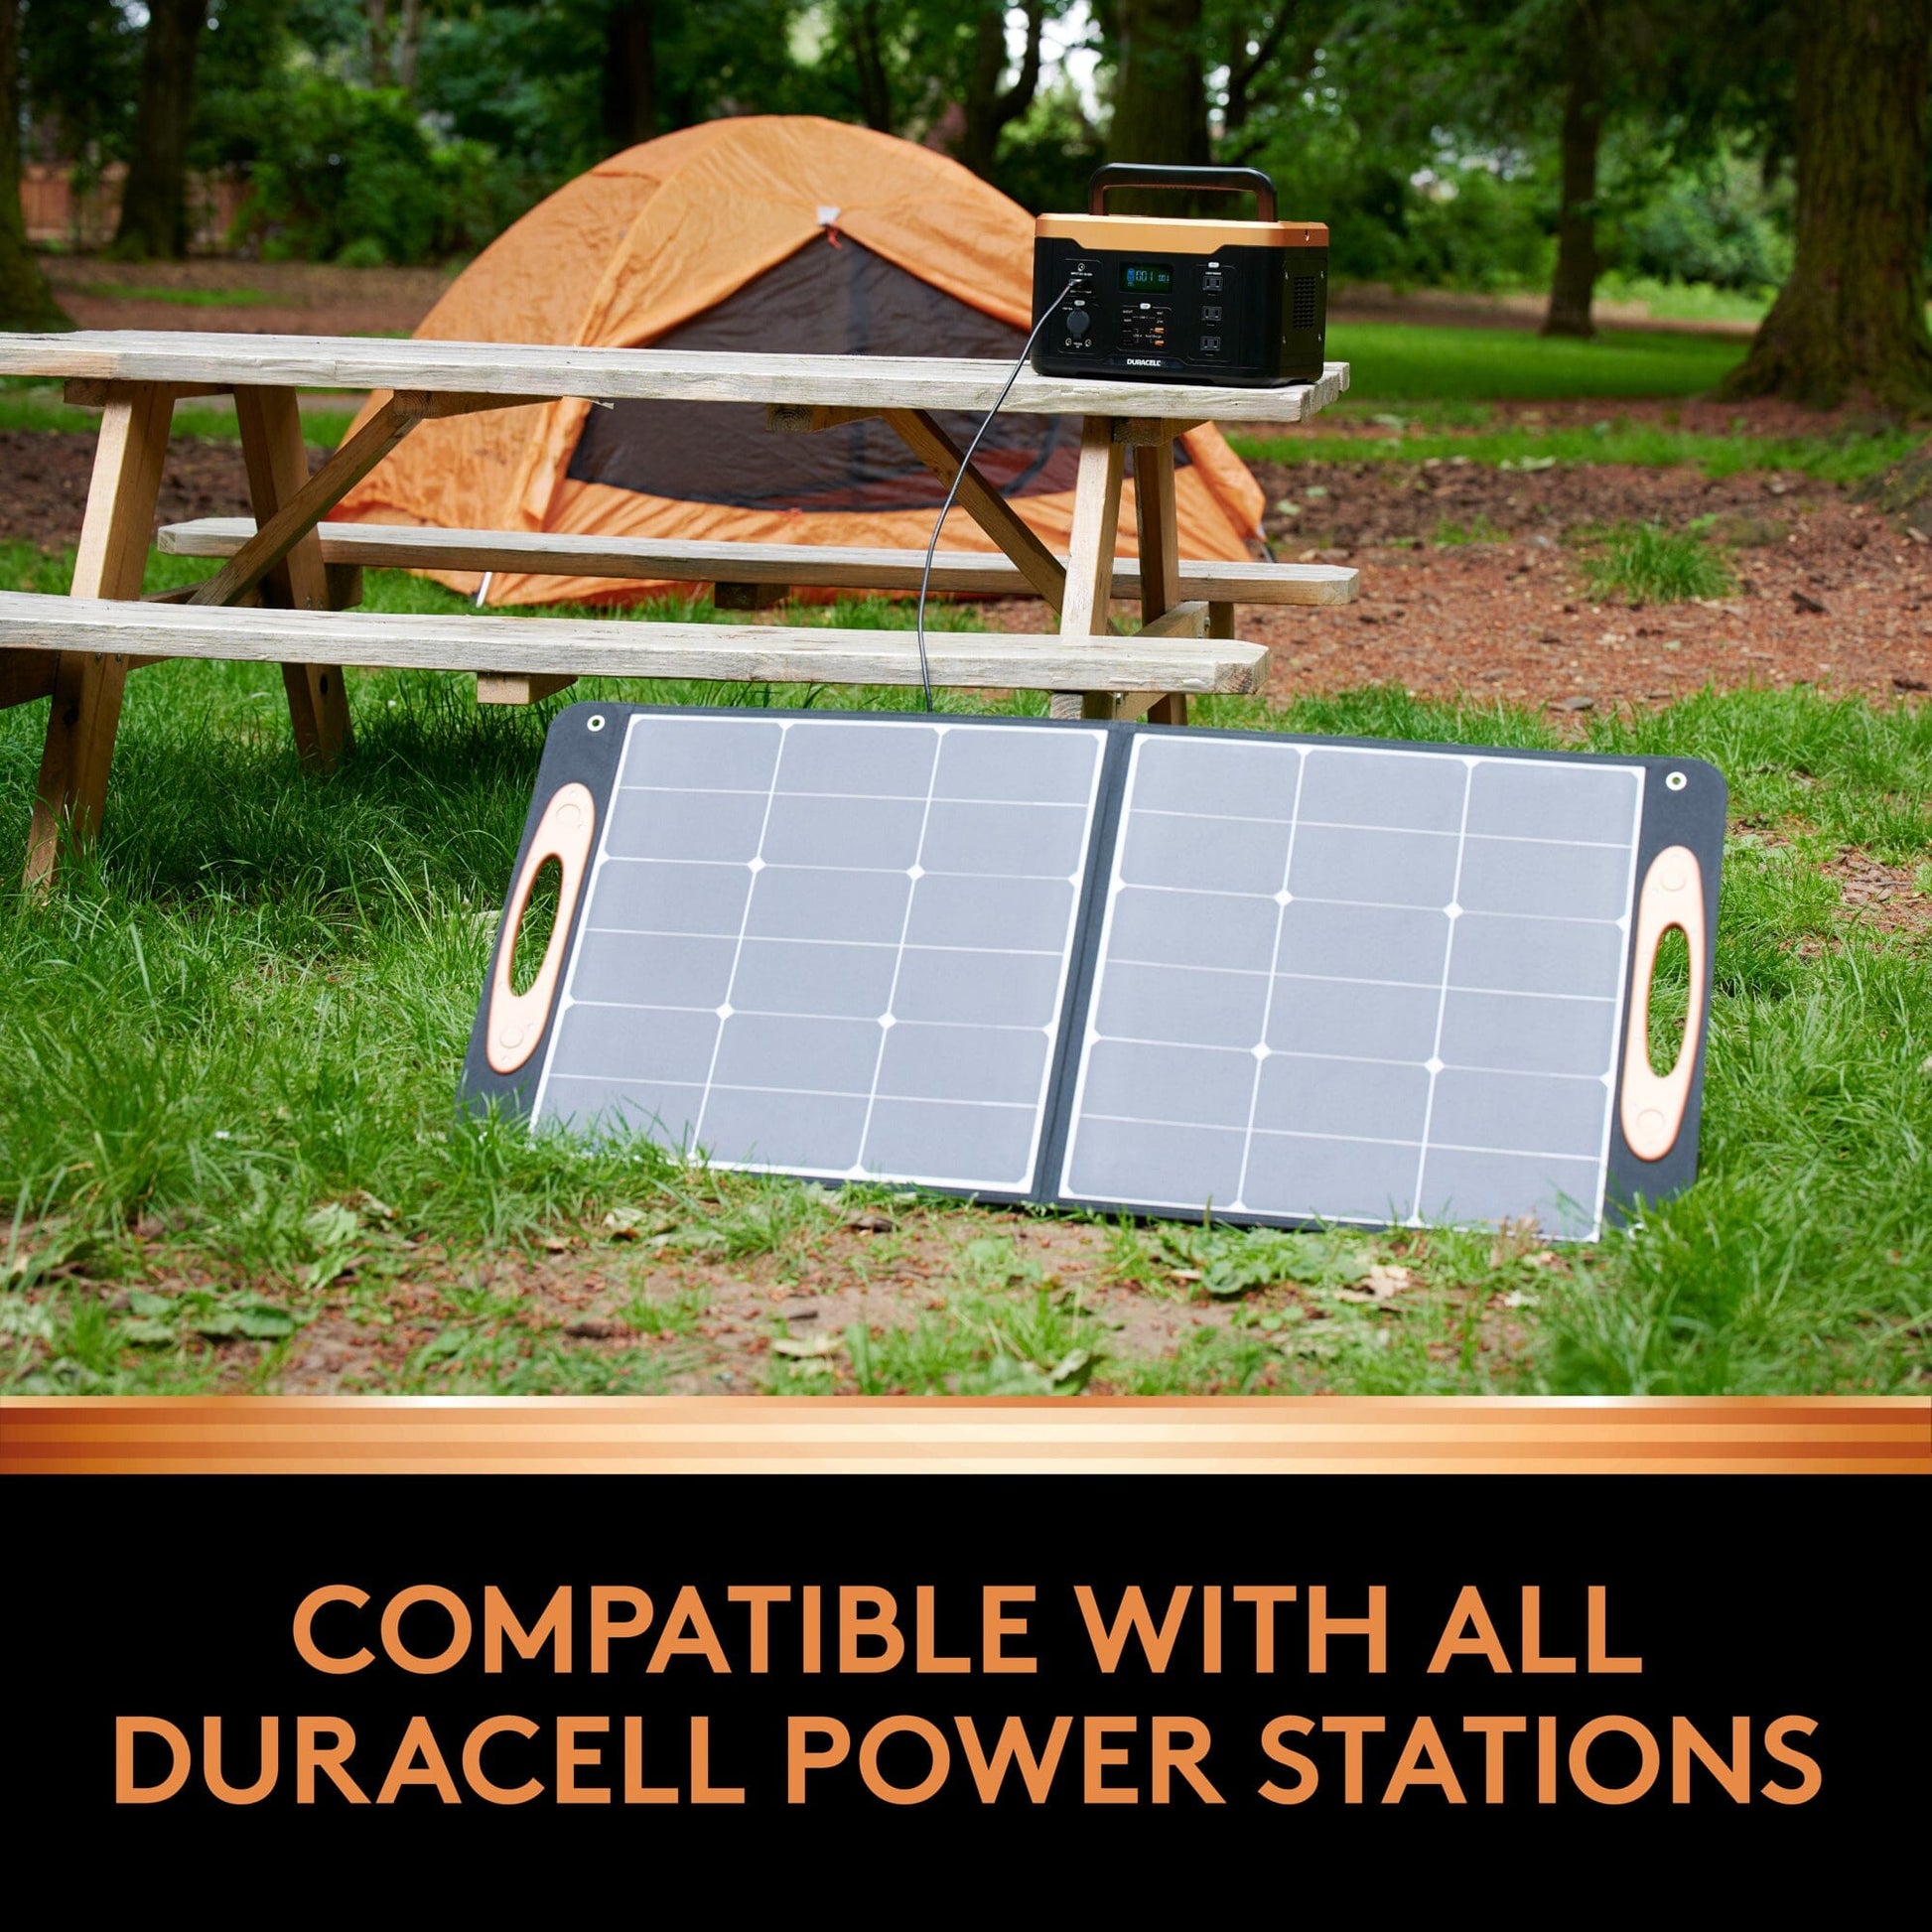 Image of a solar panel in the grass by a picnic table and a tent.